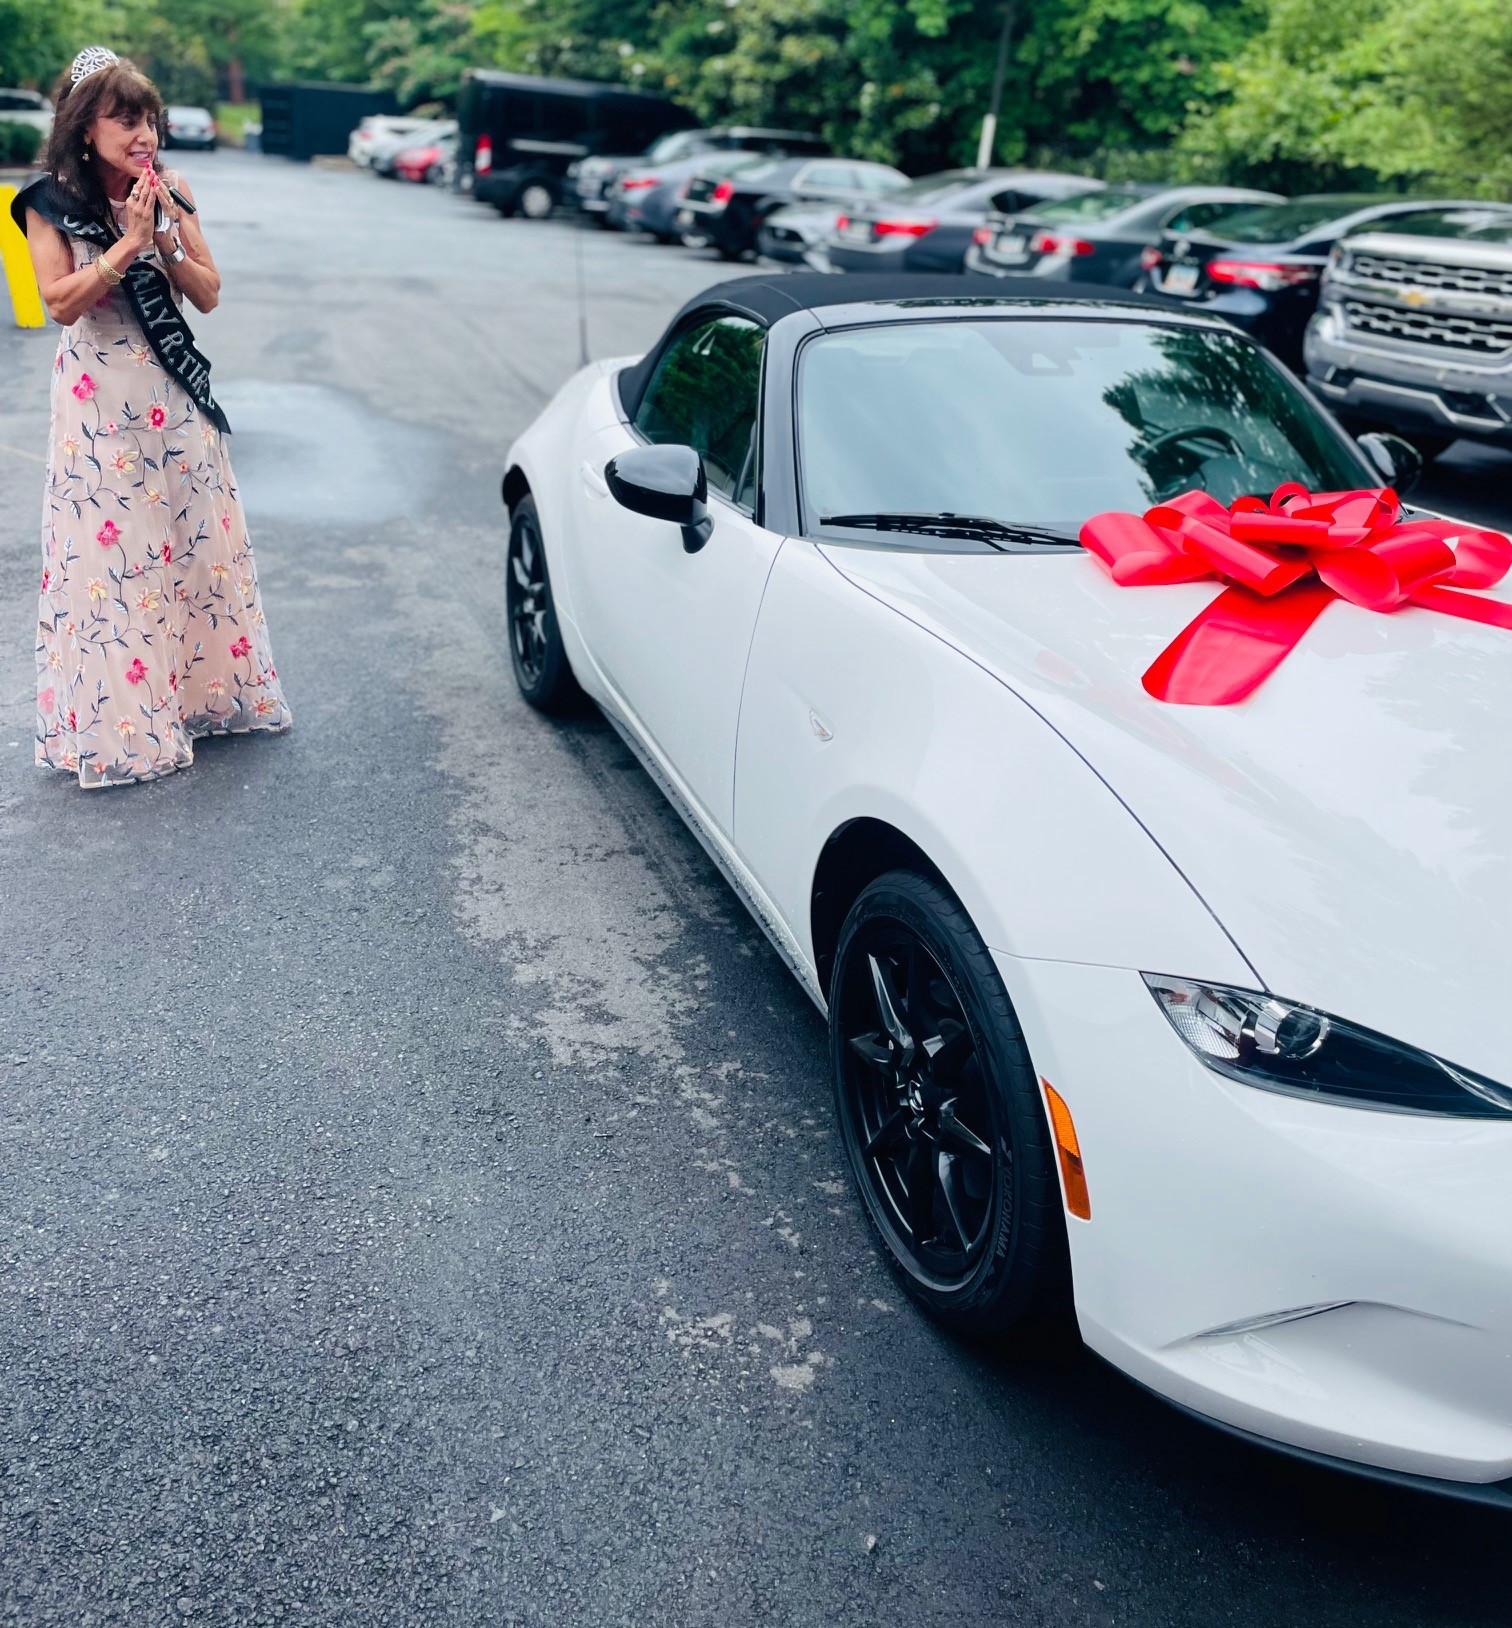 Lynne Gomez hold her hands close to her face as she reacts to the white Mazda Miata her boss, Ray, is gifting her.